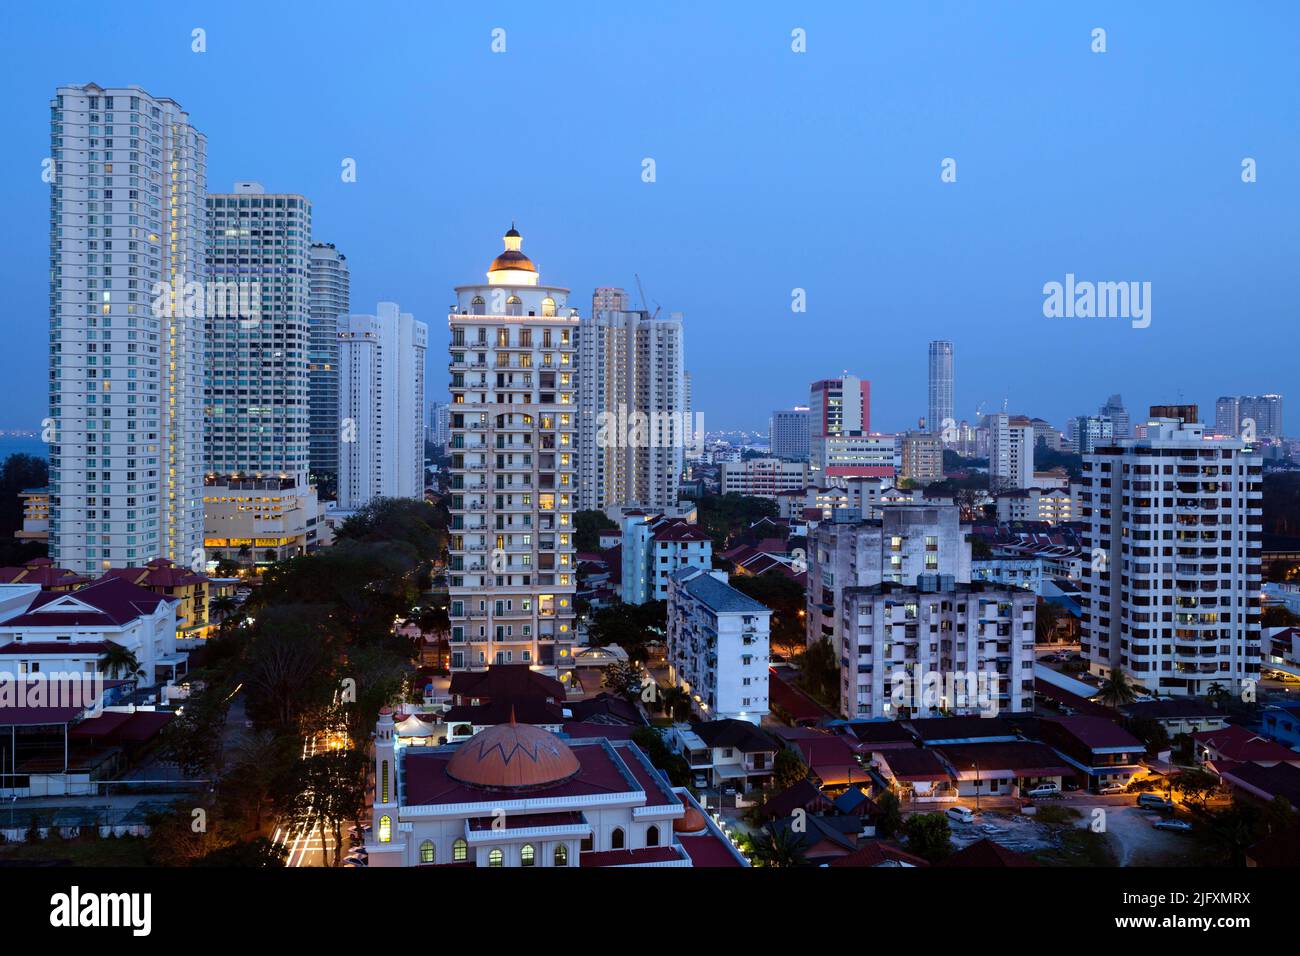 Modern skyline of Georgetown, the capital of the state of Penang in Malaysia. Named after Britain's King George III, Georgetown is located on the nort Stock Photo